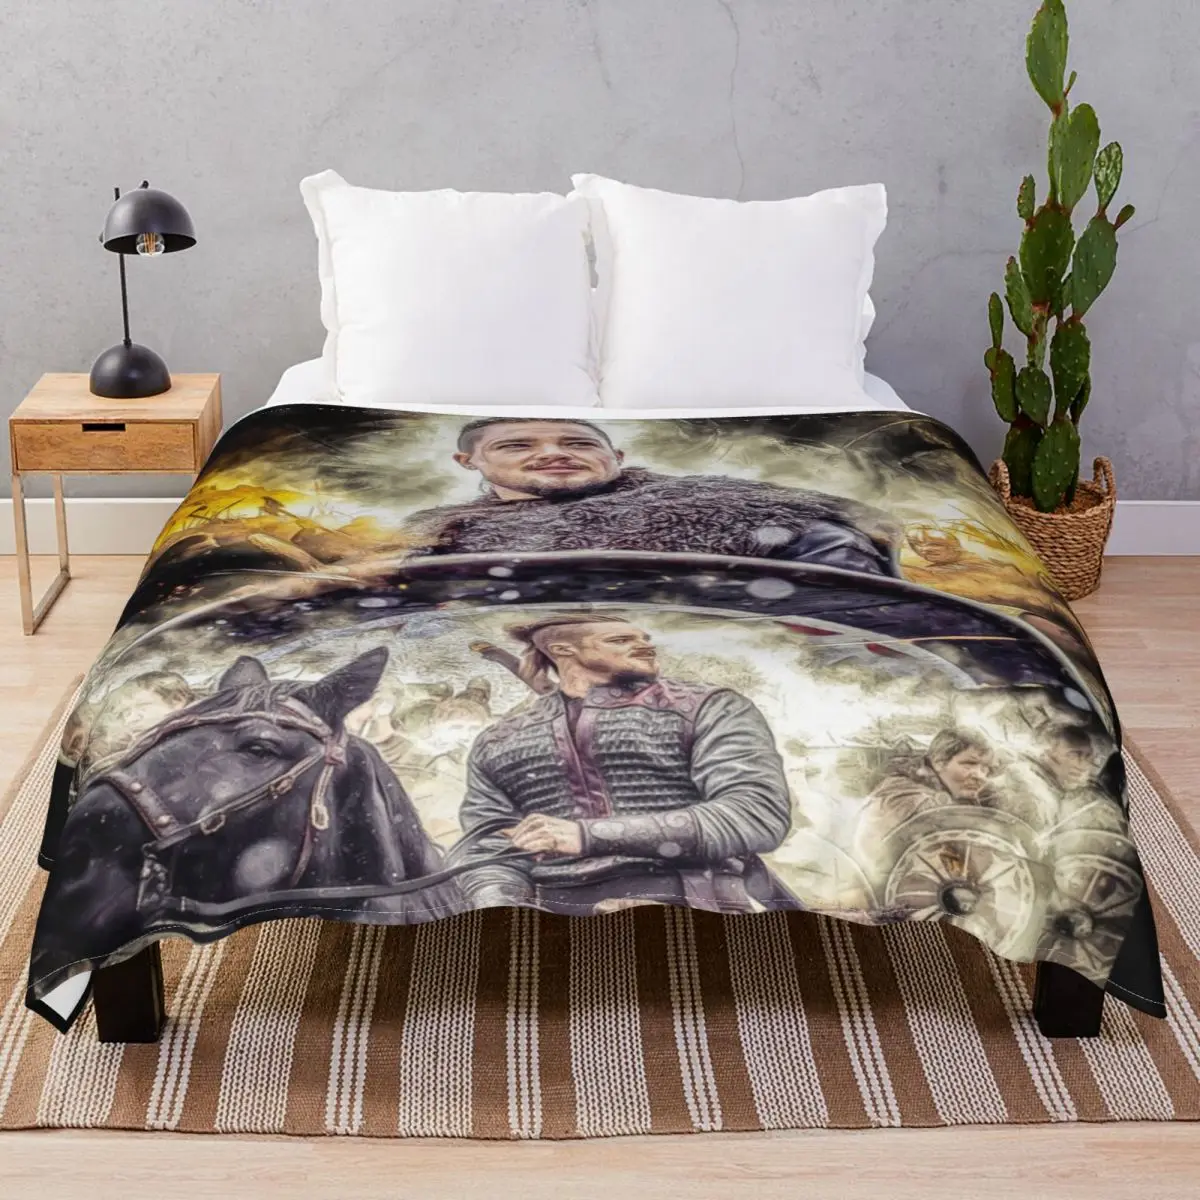 

The Last Kingdom Blanket Fleece Summer Comfortable Unisex Throw Blankets for Bedding Home Couch Travel Cinema